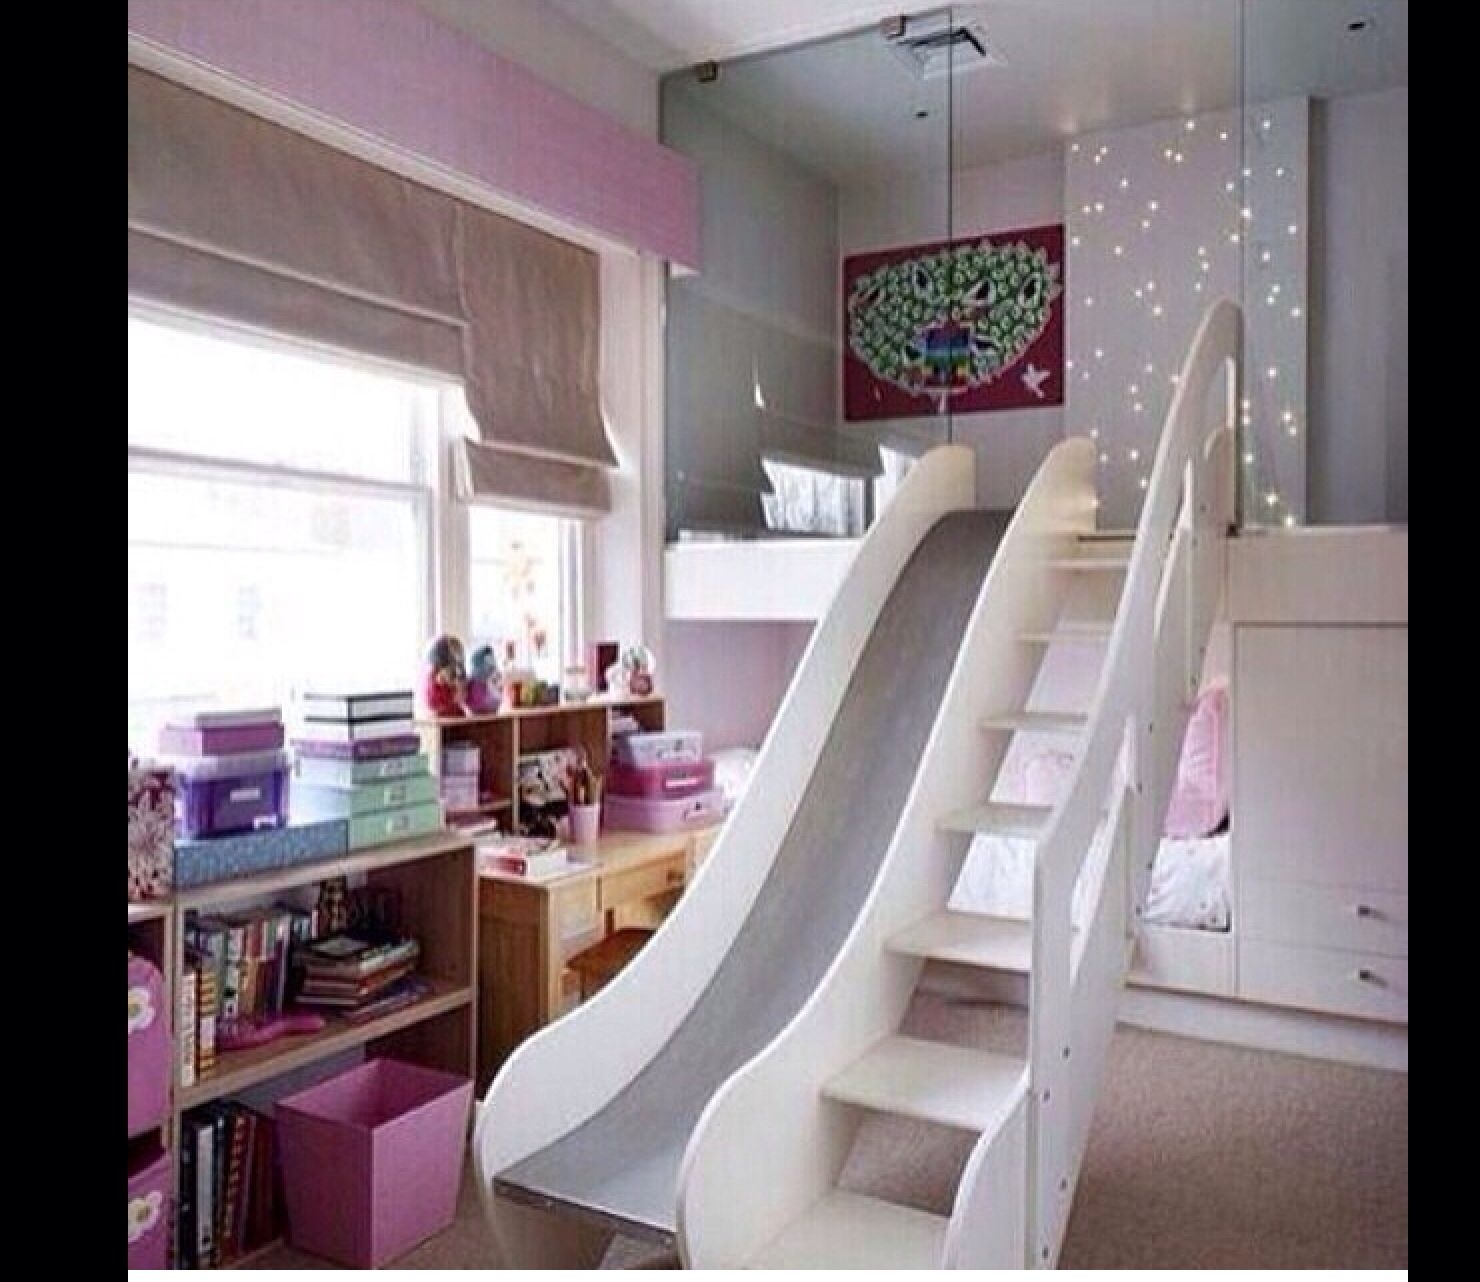 house bed with slide